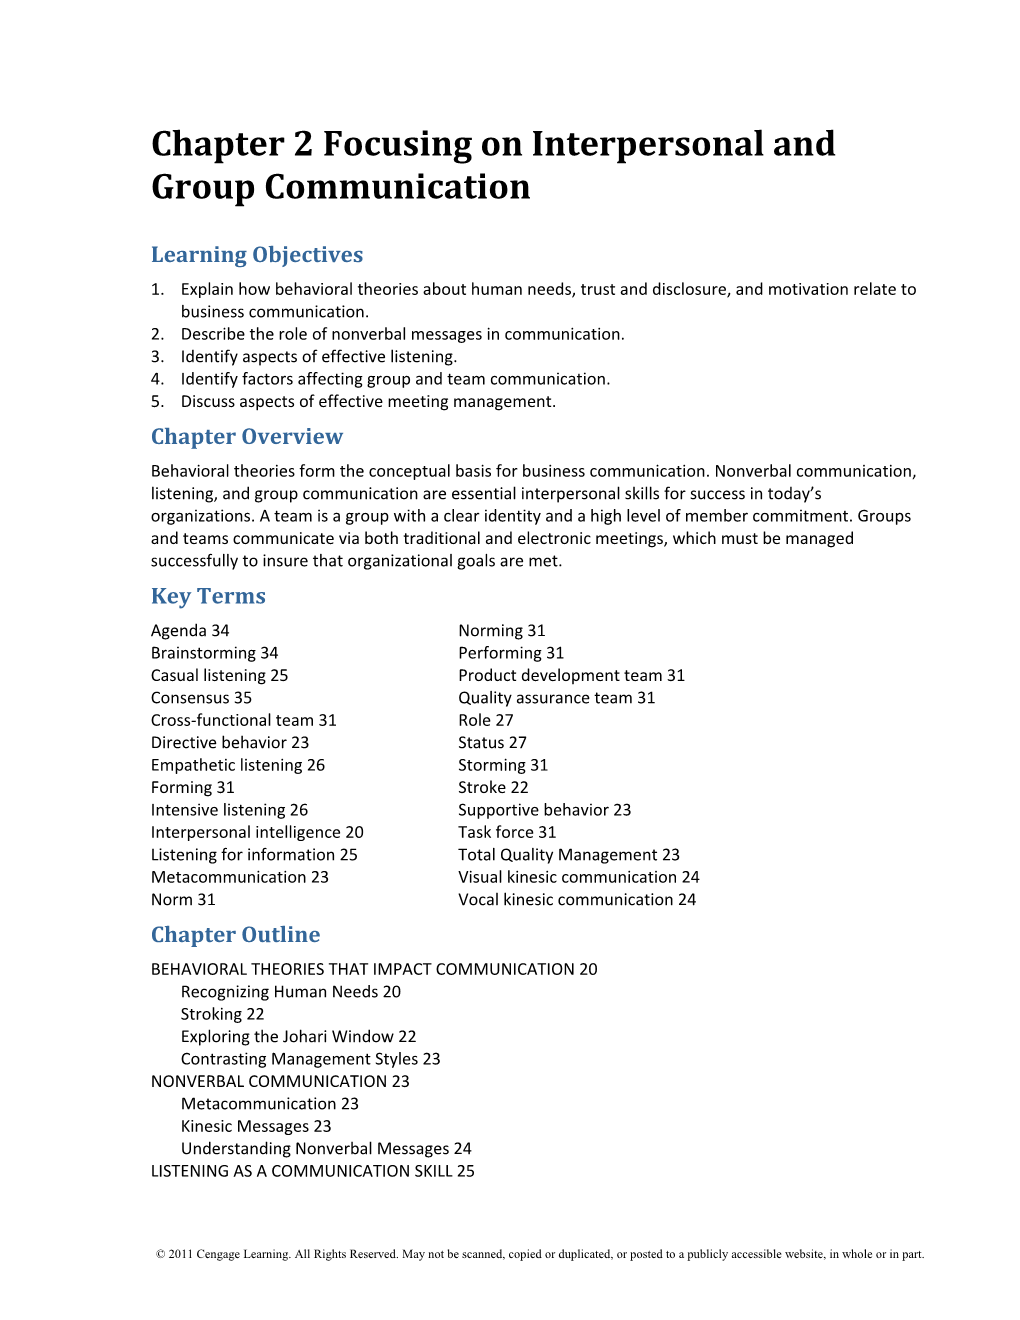 Chapter 2 Focusing on Interpersonal and Group Communication